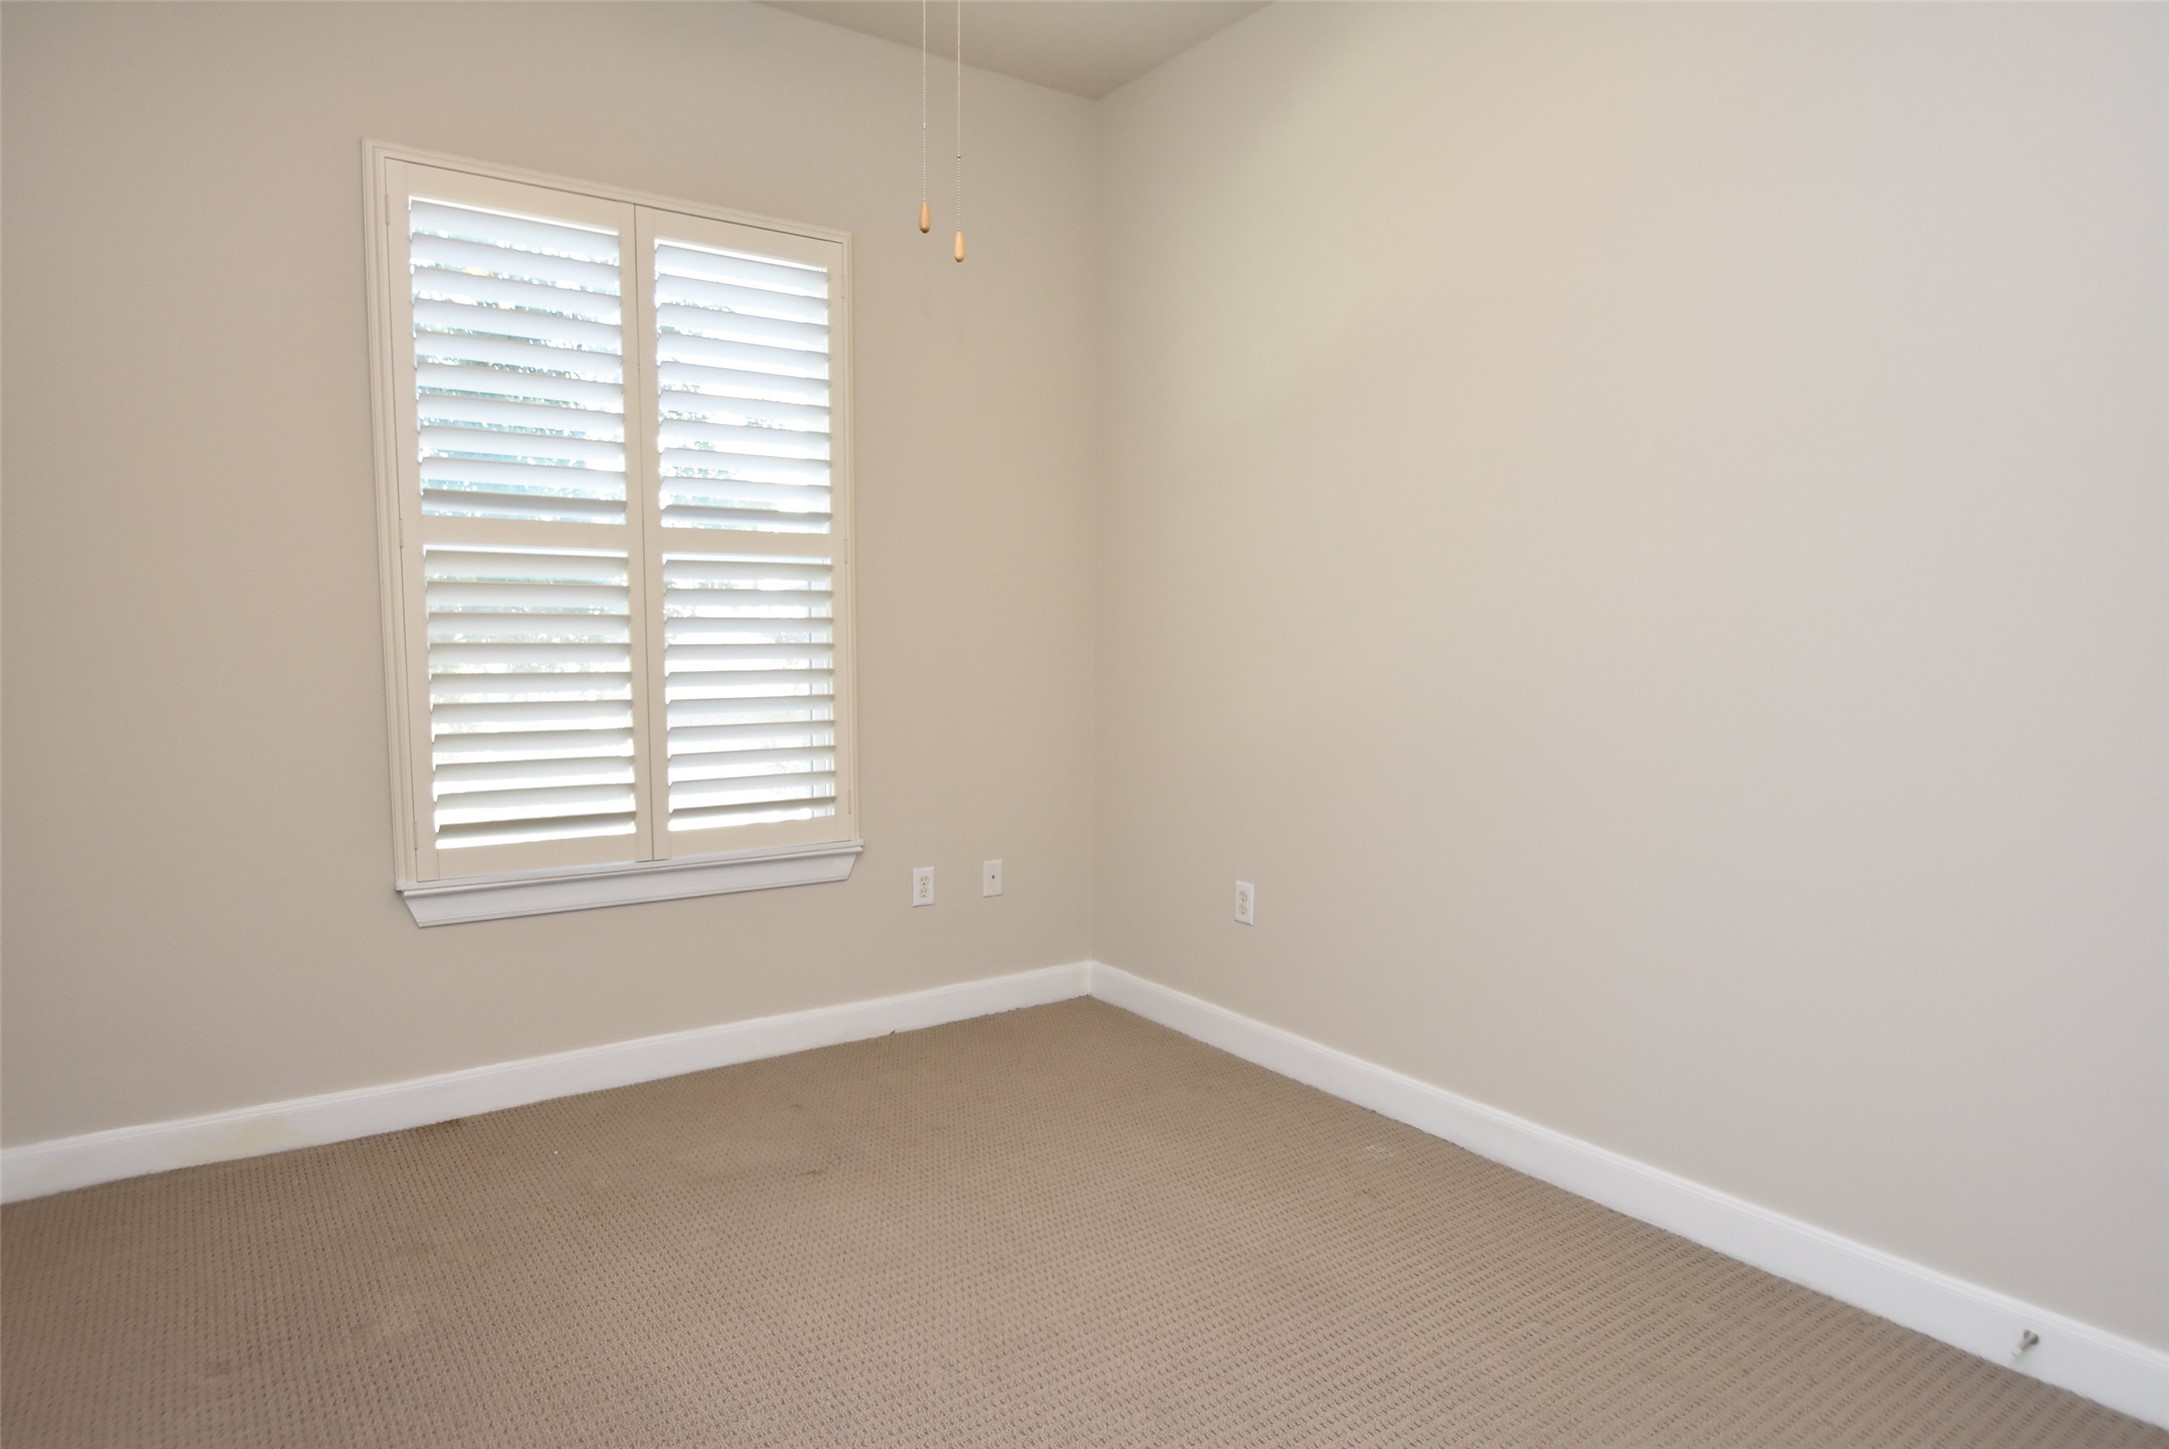 The second bedroom is nicely sized with great closet space.